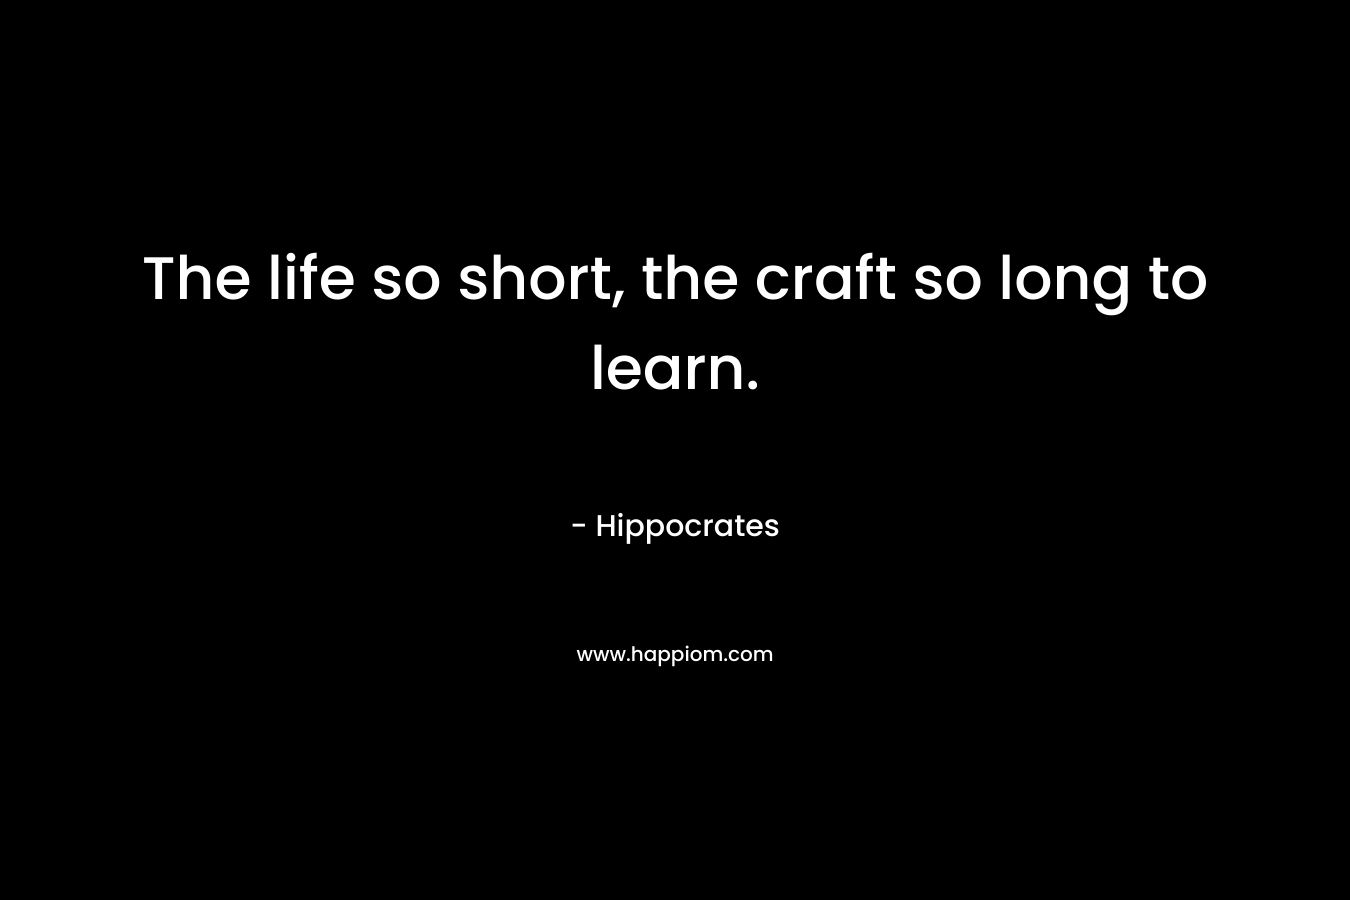 The life so short, the craft so long to learn. – Hippocrates